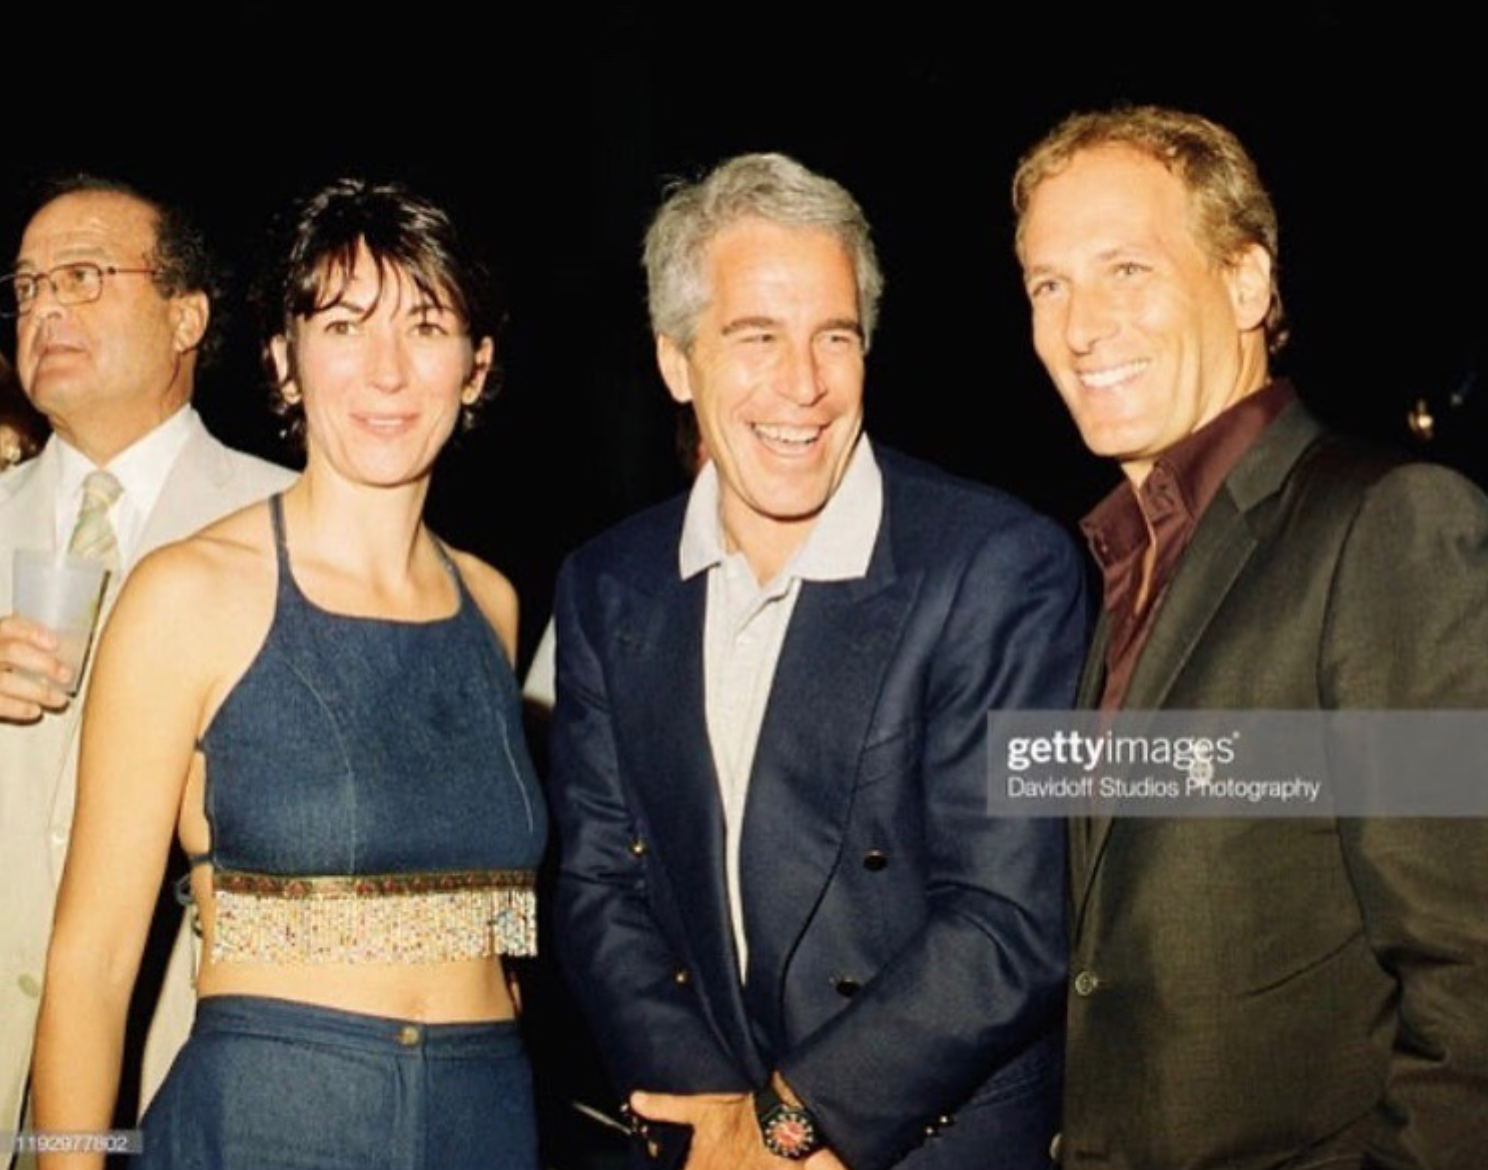 celebrities with ghislaine maxwell - ghislaine maxwell epstein - gettyimages Davidoff Studios Protography 19TOR